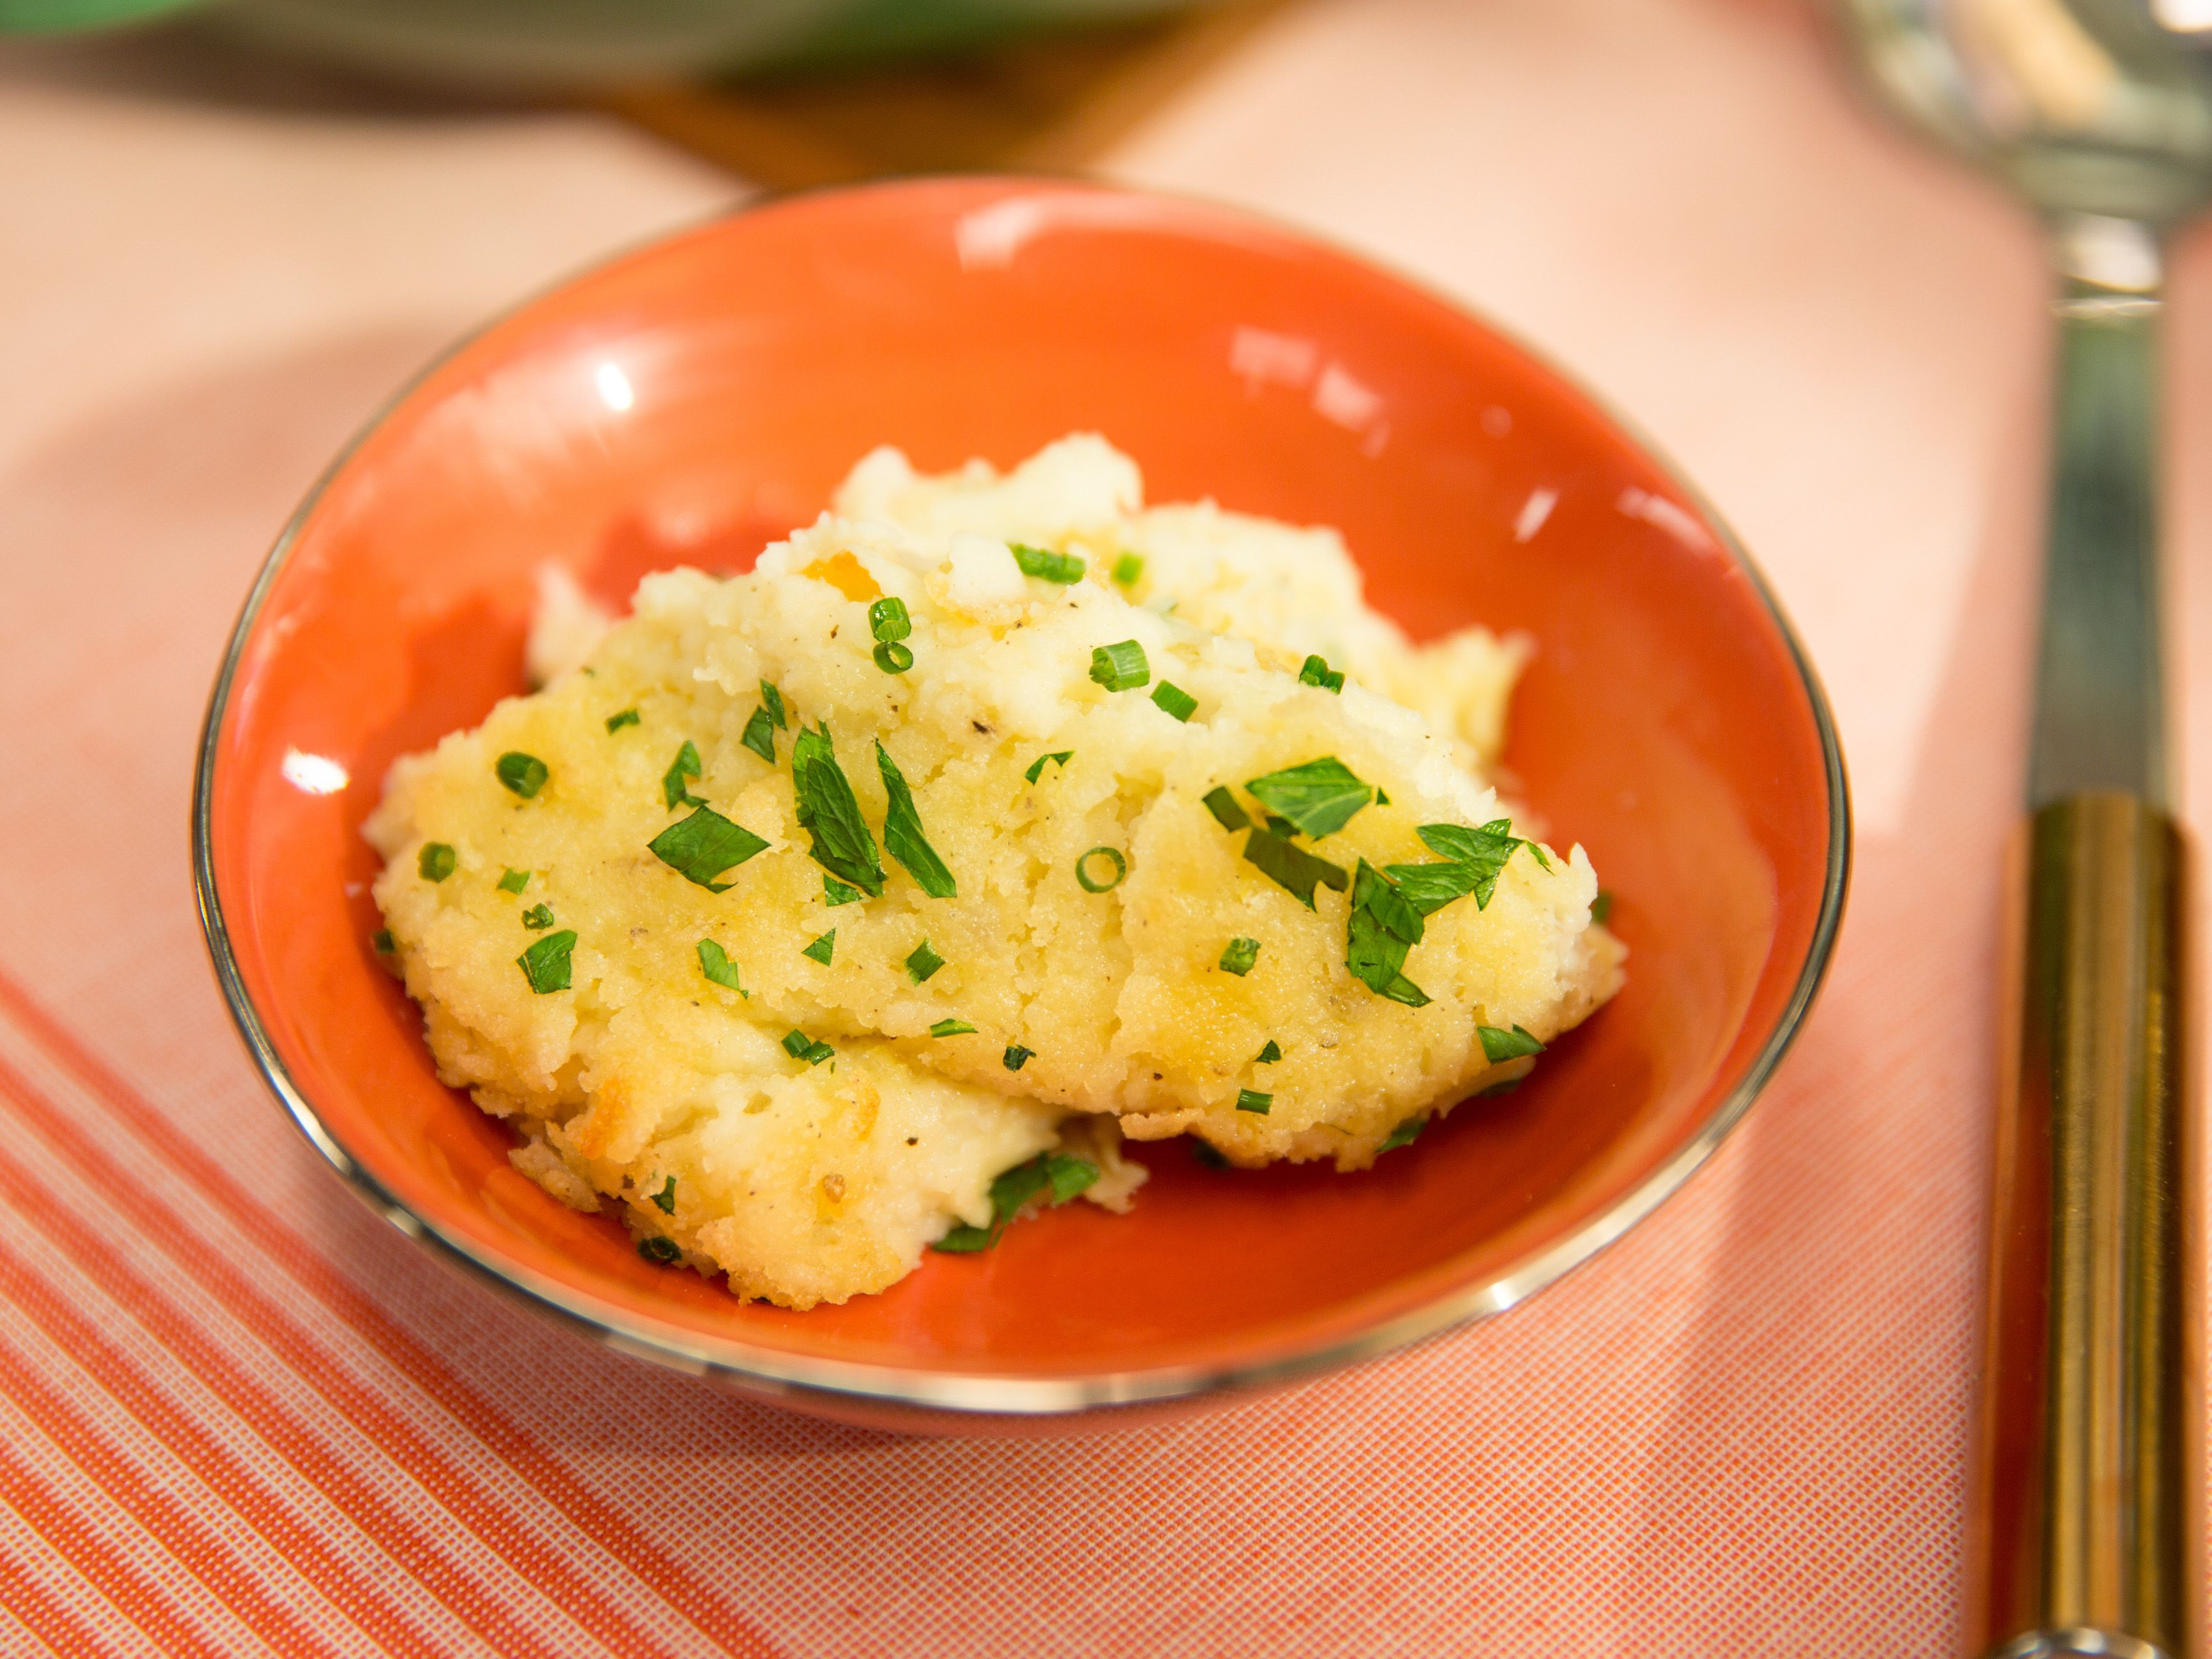 The Kitchen Thanksgiving Recipes
 The Creamiest Butteriest Tastiest Mashed Potatoes Ever